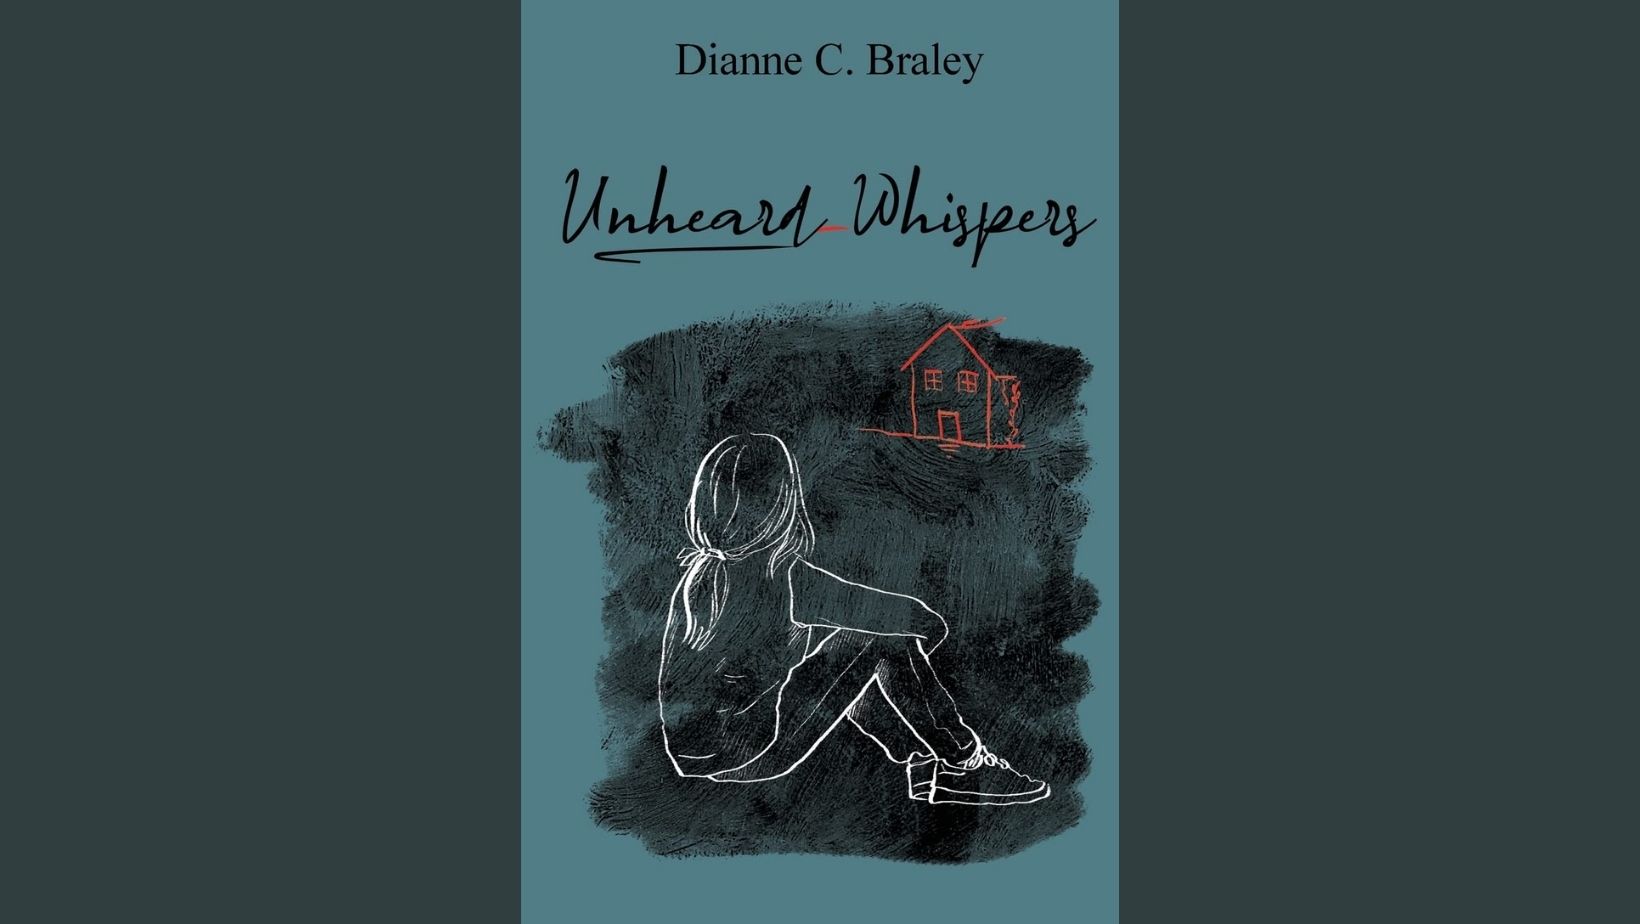 Congratulations to Dianne C. Braley on the publication of her poetry collection